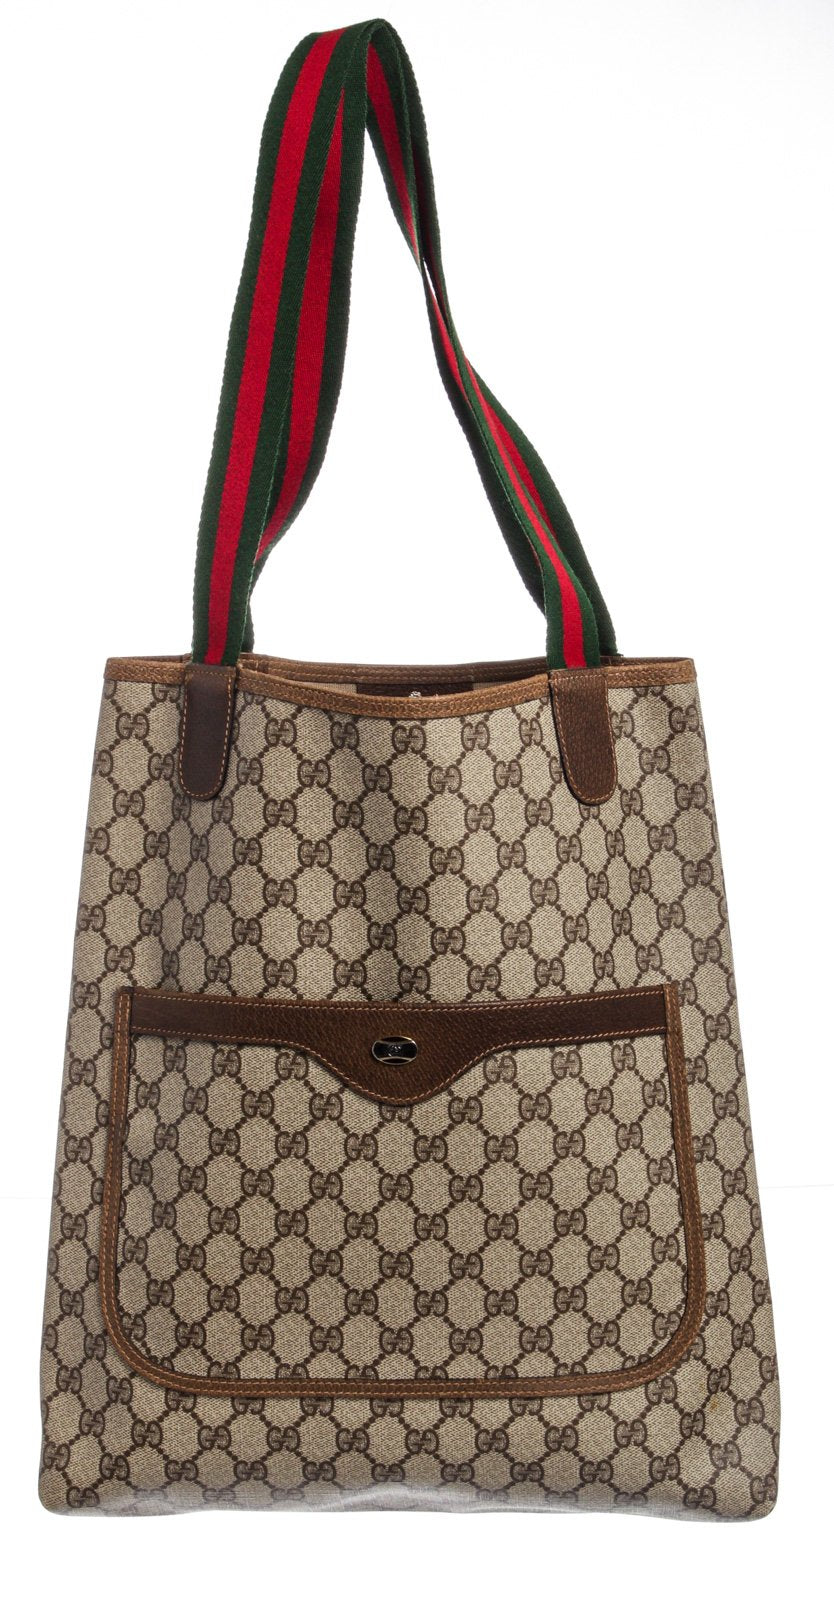 Gucci, Bags, Vintage Gucci Monogram Leather Braided Straps